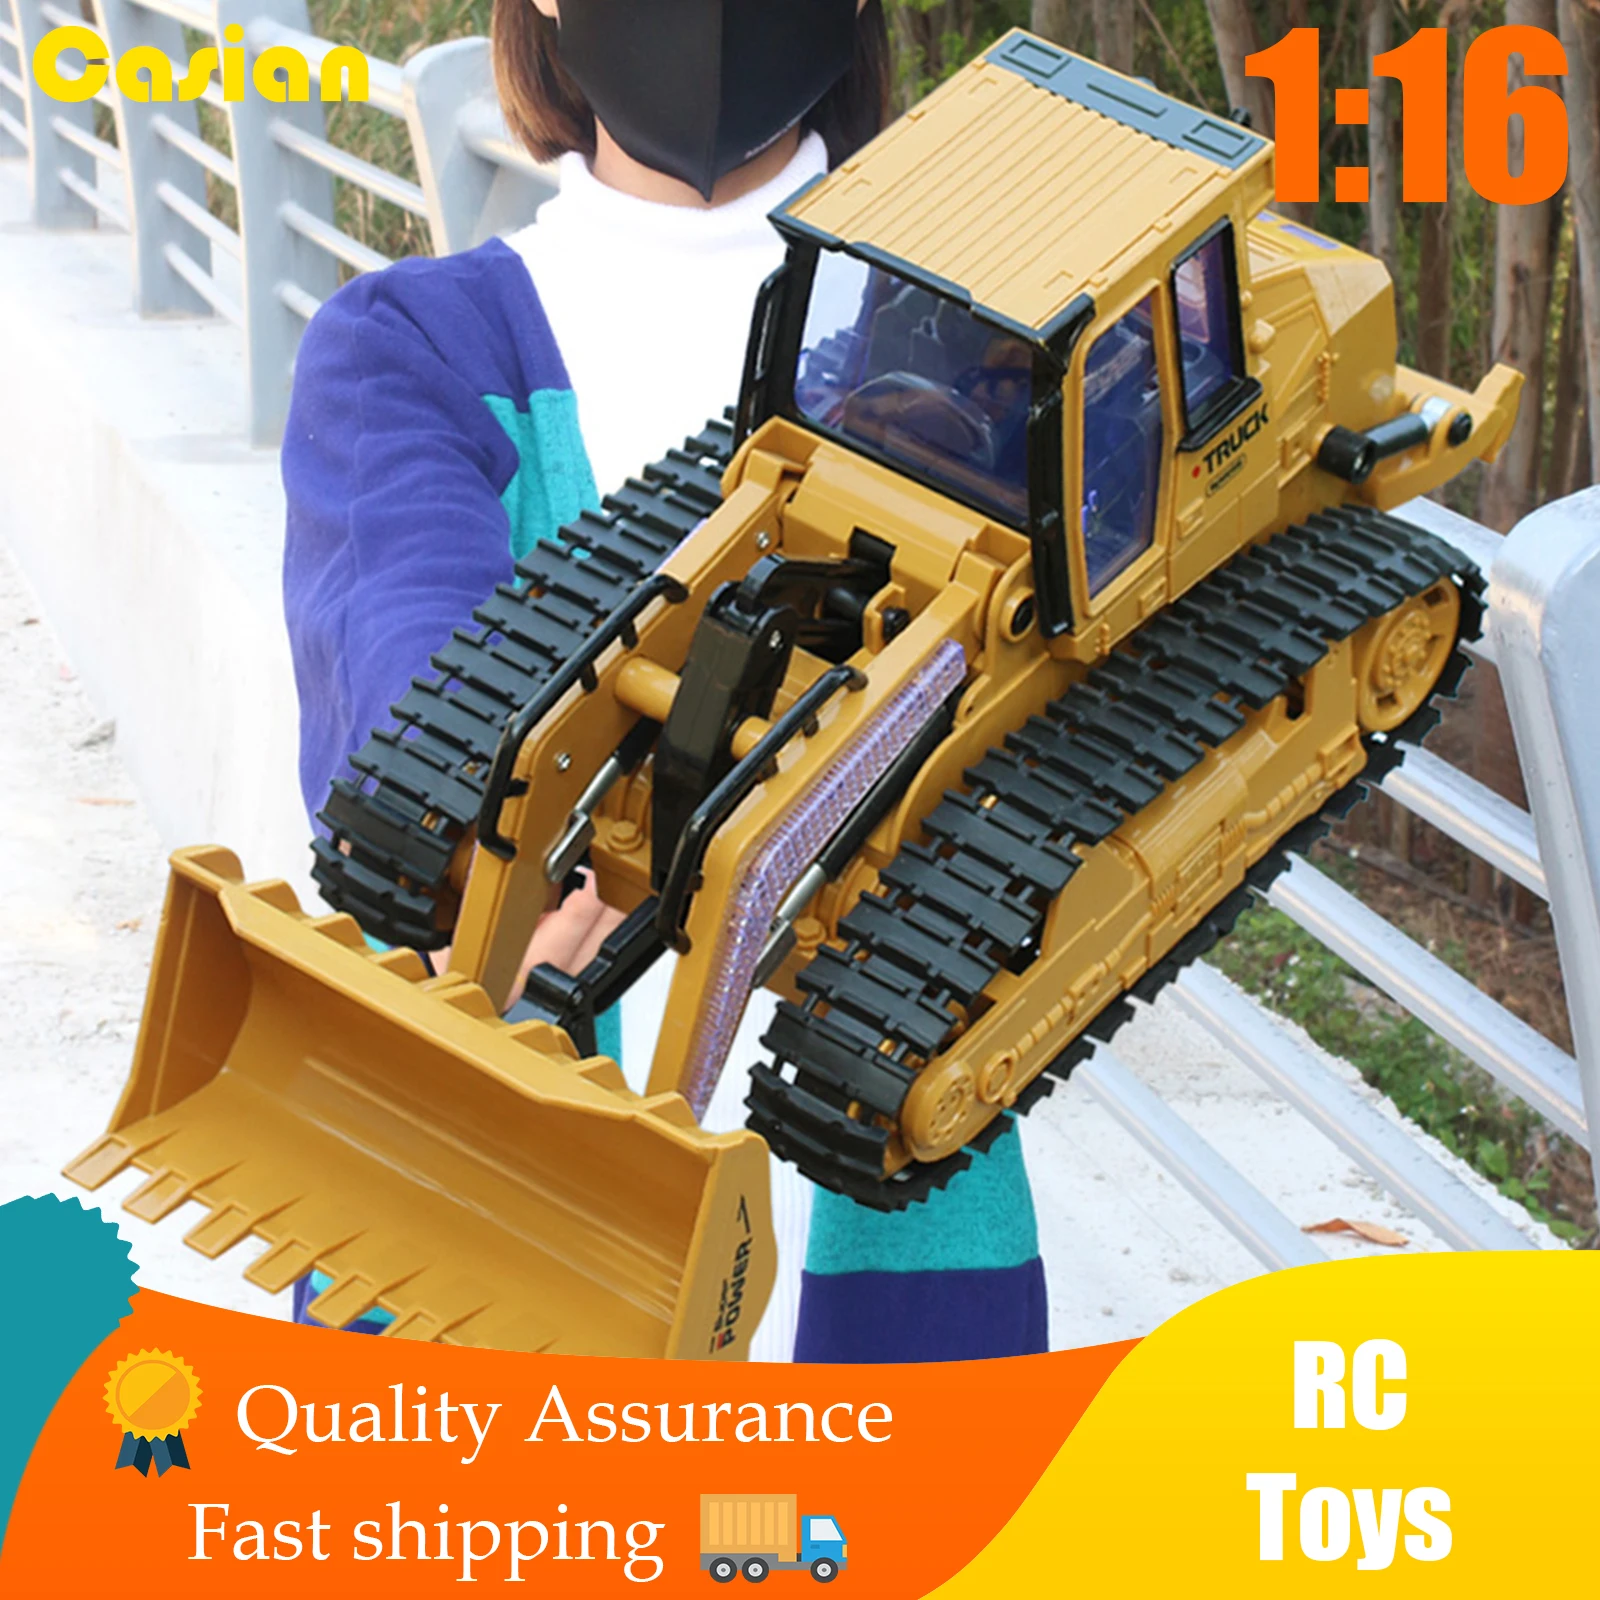 

1:16 Rc Bulldozer Excavator Toy Rc Engineering Vehicle Dump Dumper Alloy and Plastic Excavator Rtr Toys for Kids Birthday Gift